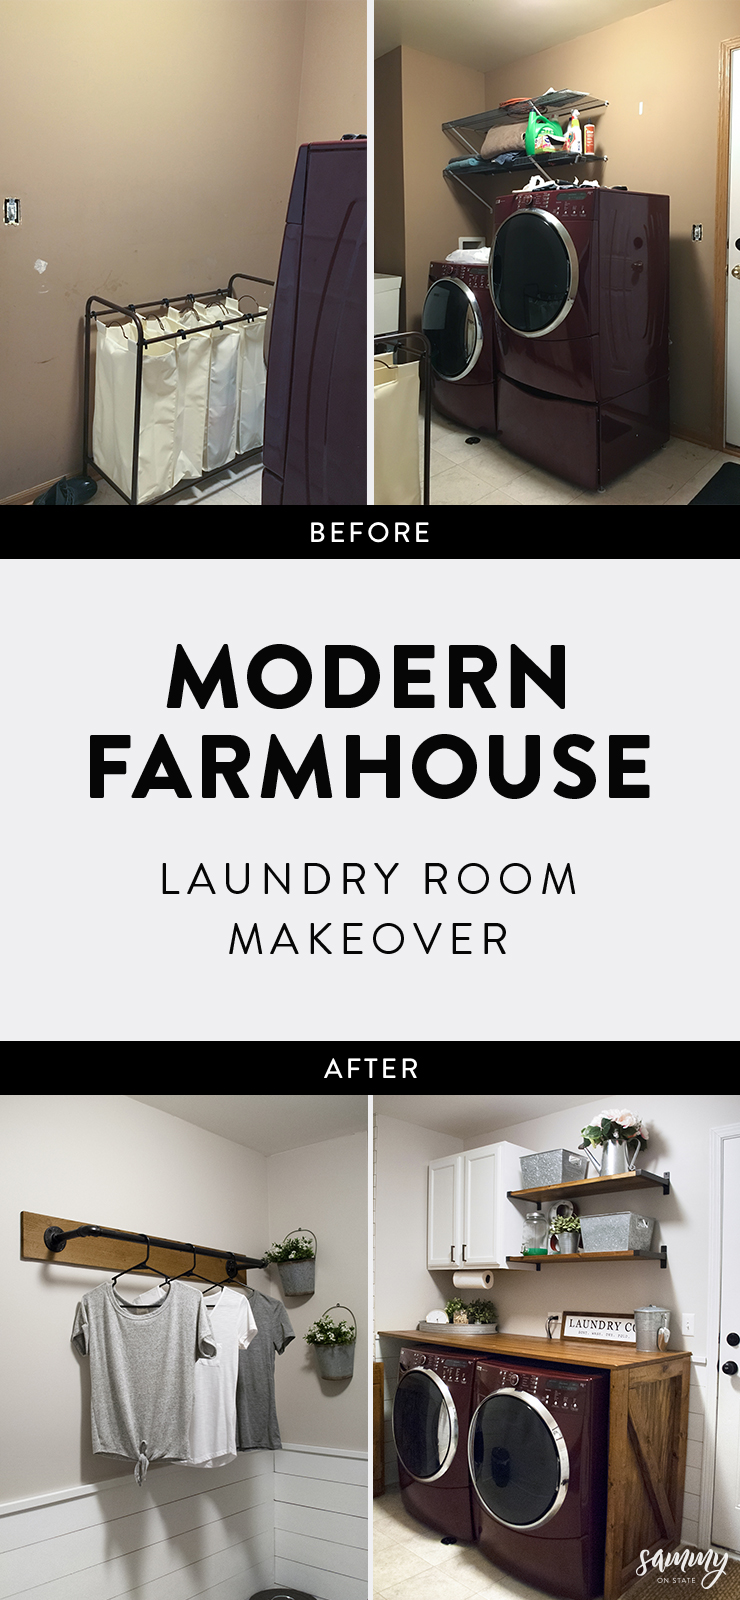 DIY Laundry Room Shelving - Get this farmhouse look